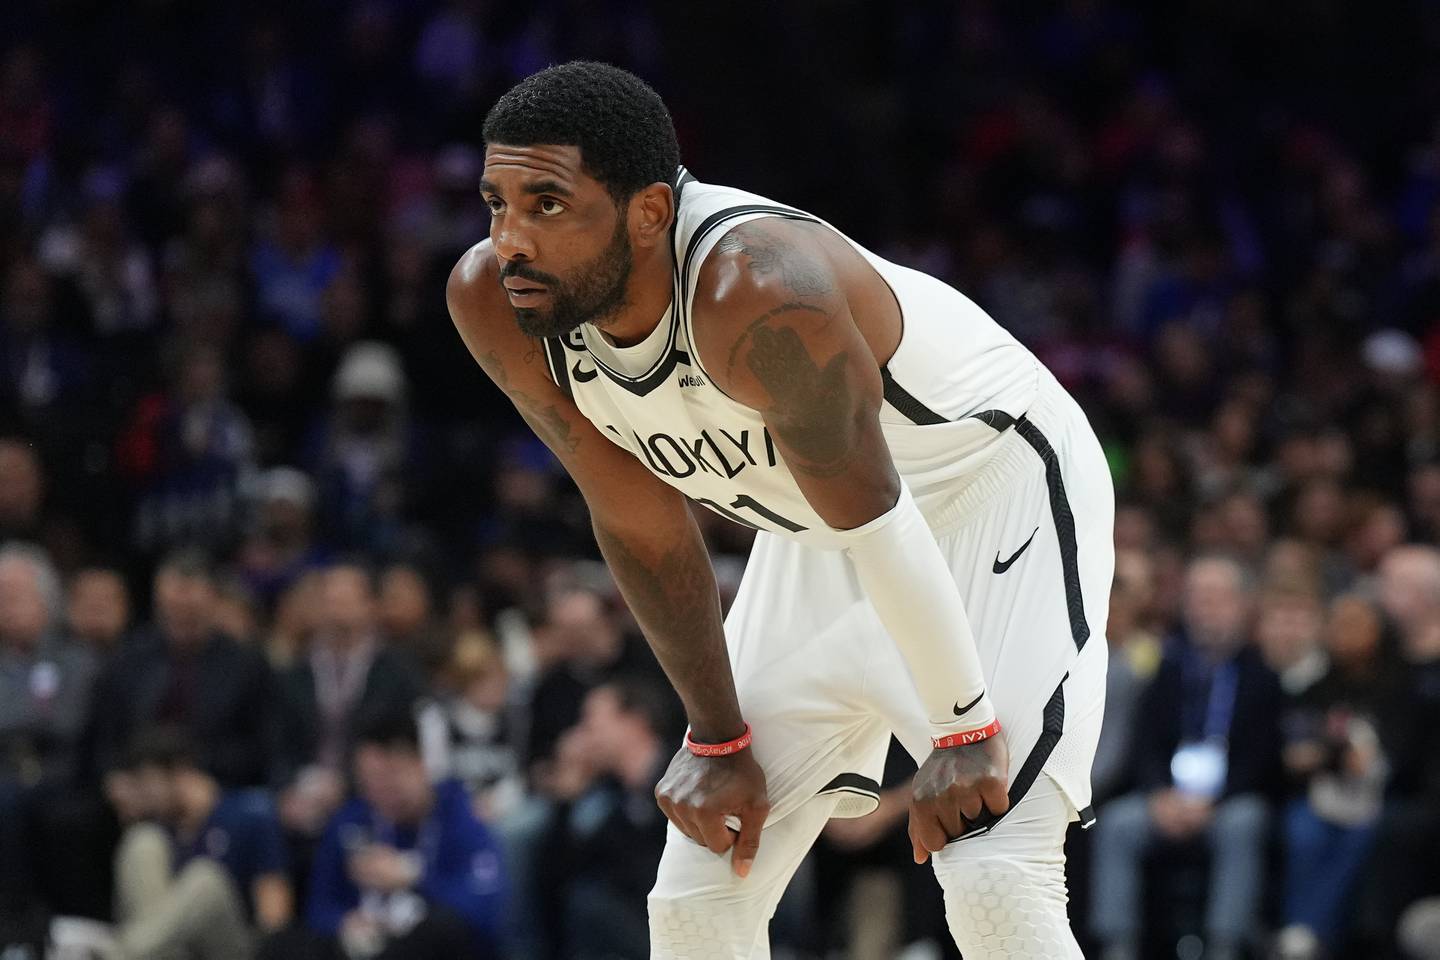 Nets guard Kyrie Irving plays against the 76ers on Nov. 22, 2022, in Philadelphia.